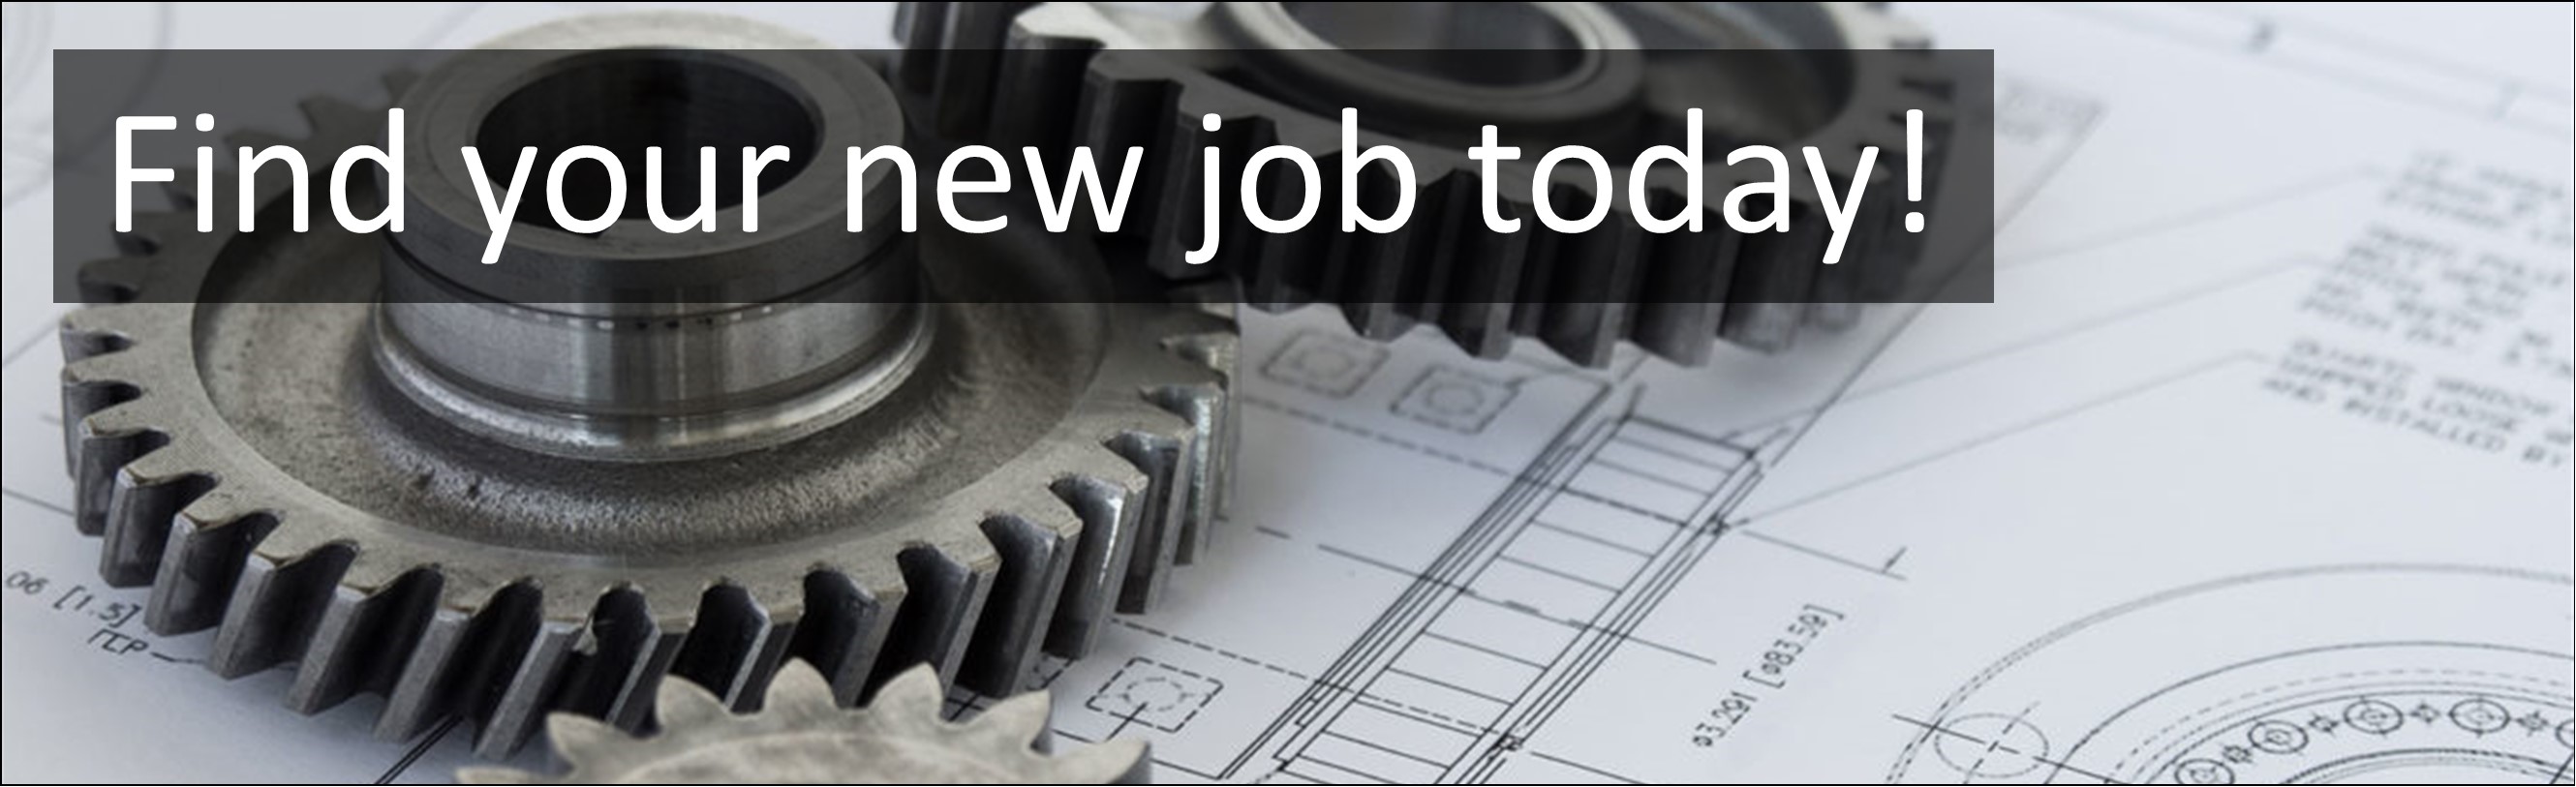 Engineering Jobs. Multi-Skilled Maintenance Engineer / Mechanical / Electrical Jobs, Careers & Vacancies in Middlesbrough, North Yorkshire Advertised by AWD online – Multi-Job Board Advertising and CV Sourcing Recruitment Services